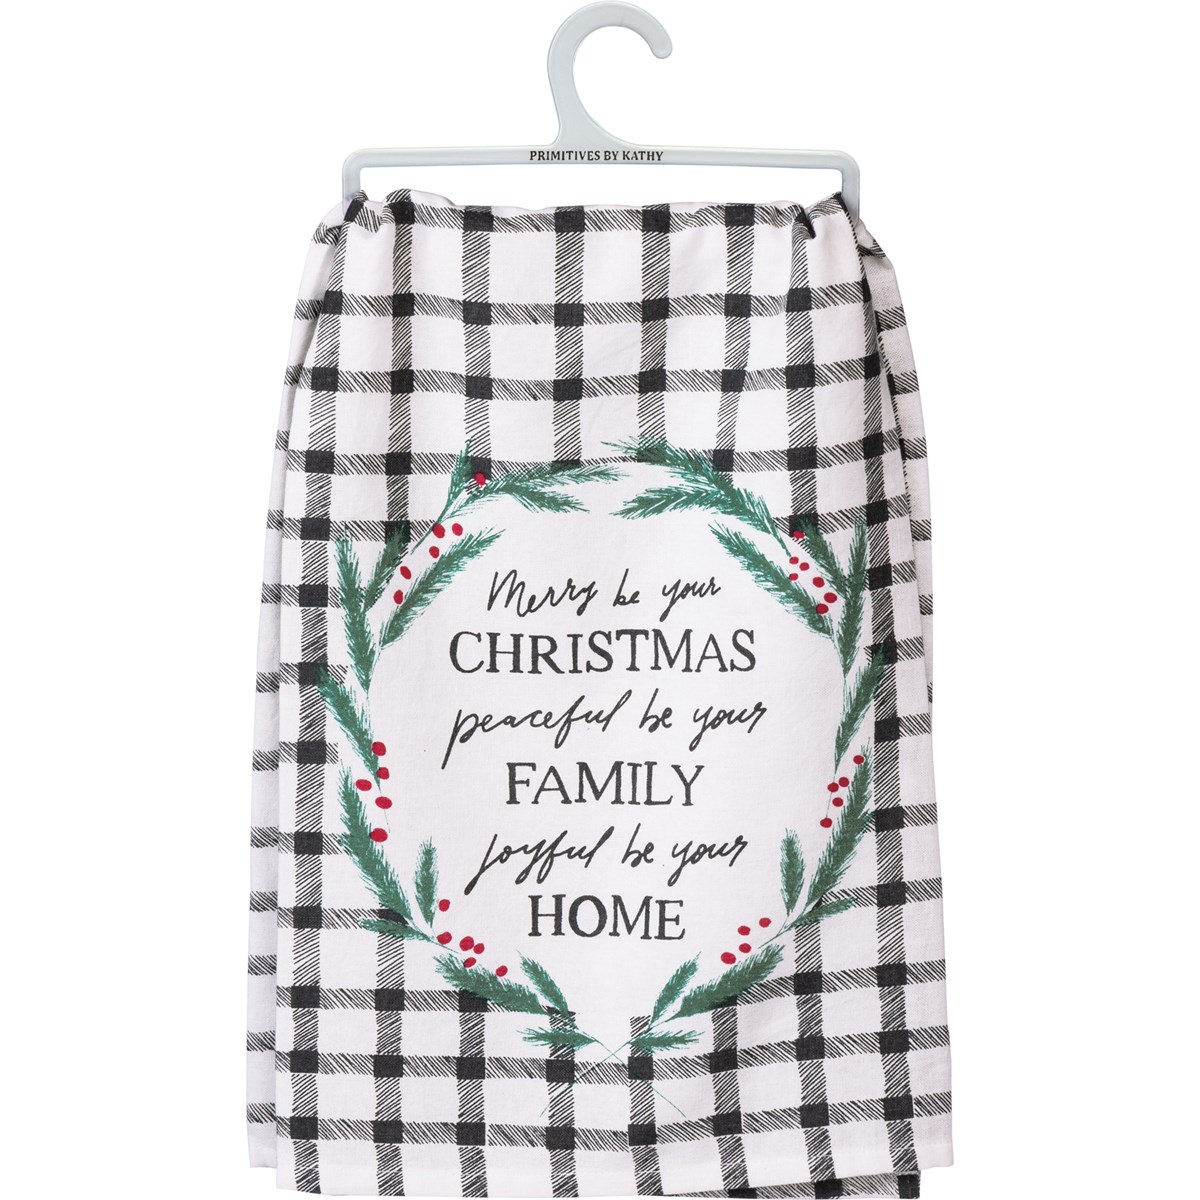 Merry Be Your Christmas Kitchen Towel - Cotton